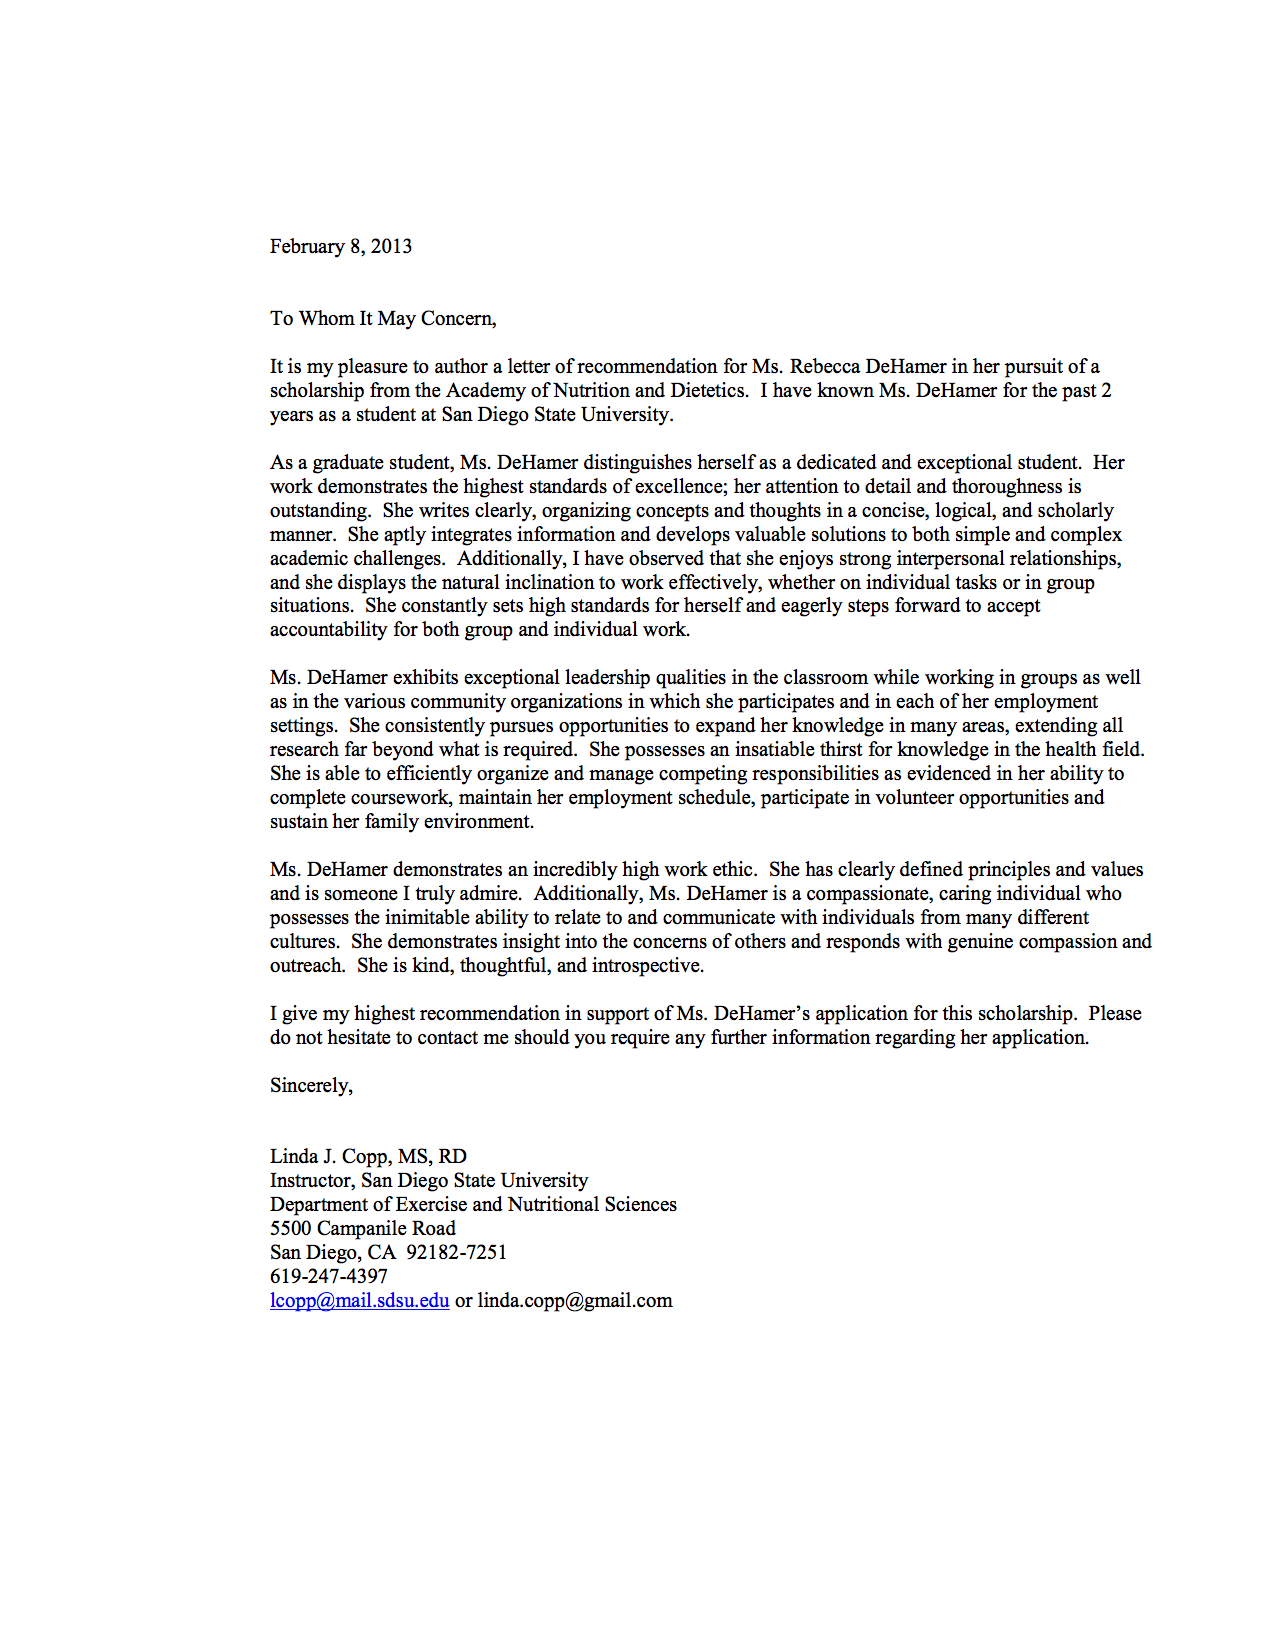 Sample Recommendation Letter For Scholarship From Professor for dimensions 1275 X 1650